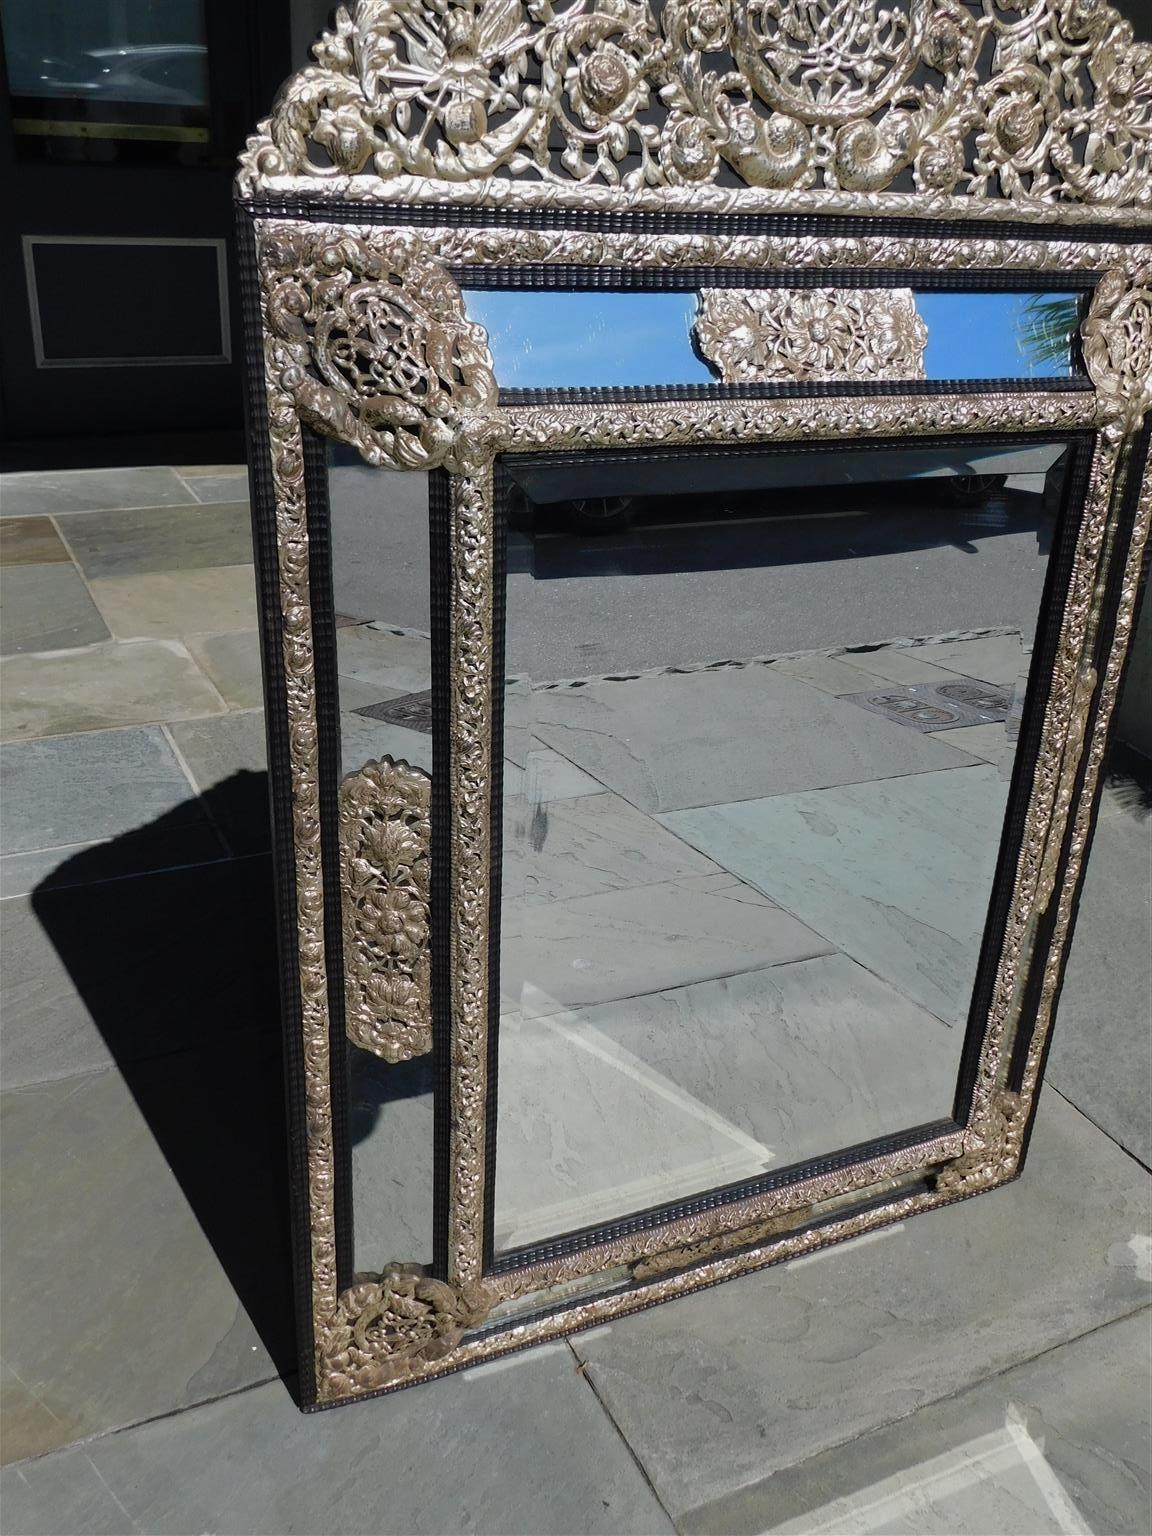 Italian Silver Gilt Embossed Foilate Wall Mirror with Ebonized Frame, Circa 1780 For Sale 1